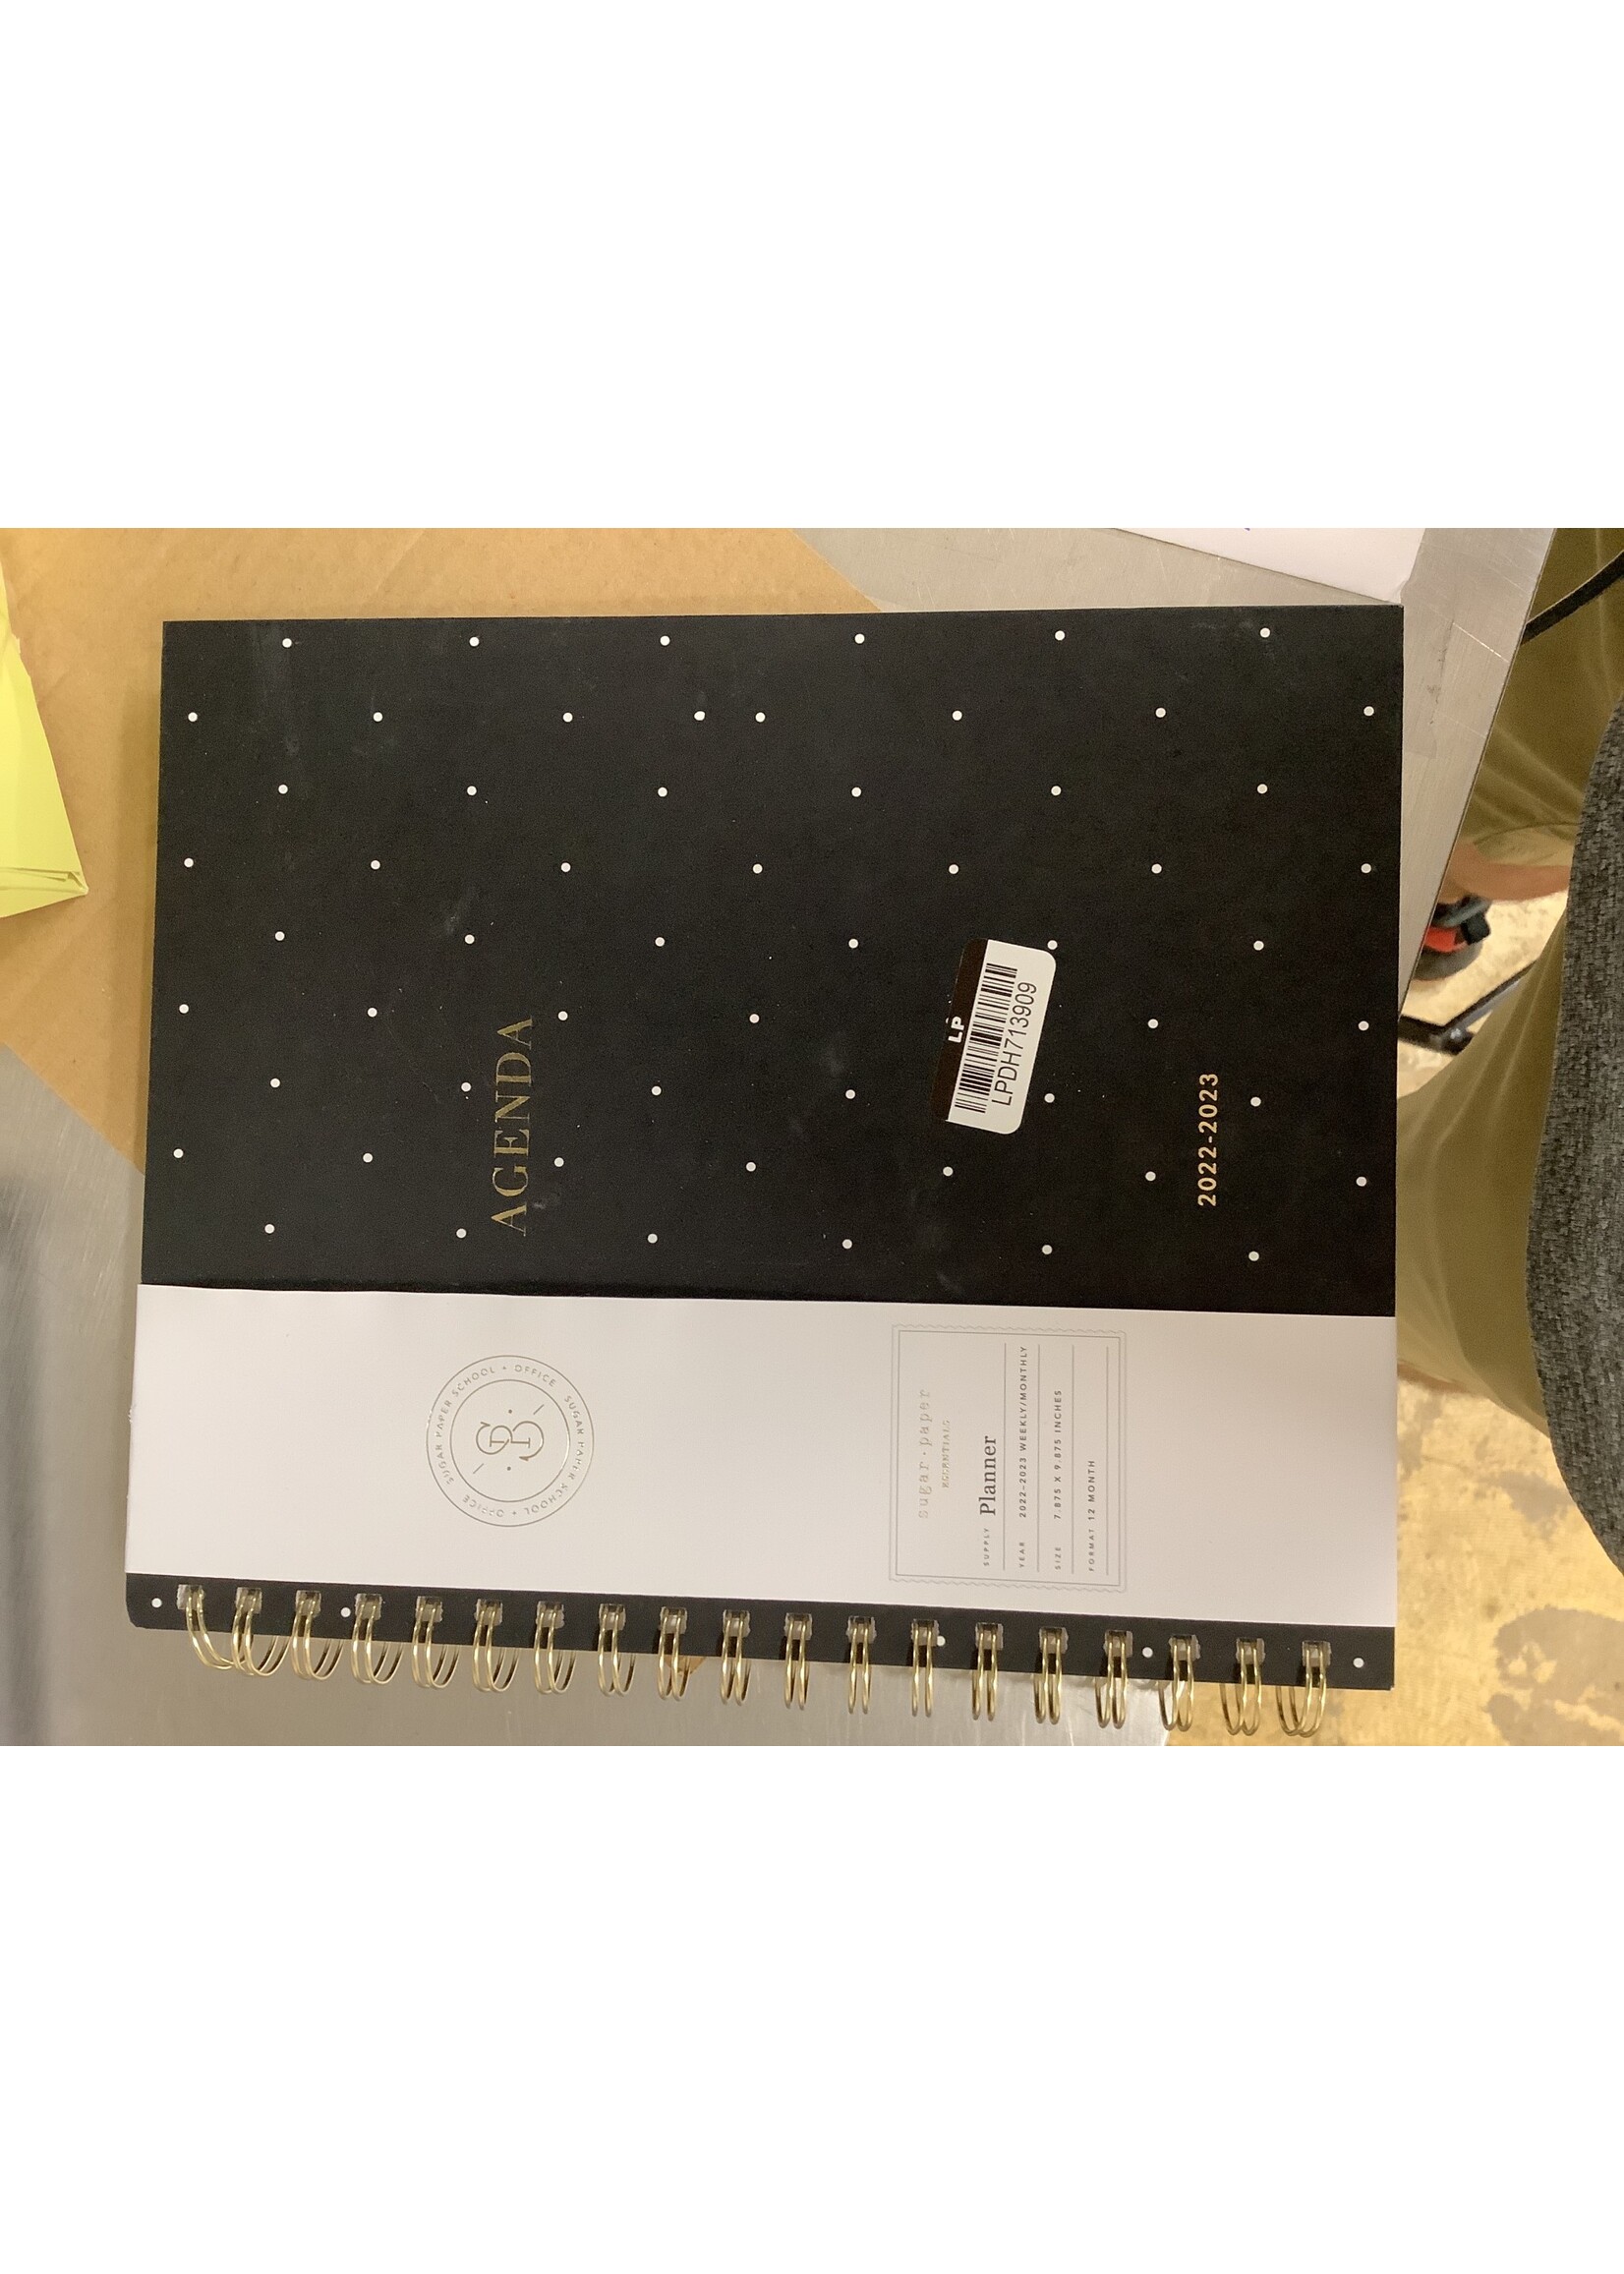 2022-23 Academic Planner Weekly/Monthly Hardcover 9.875 inch x7.875 inch  Black w/White Dot - Sugar Paper